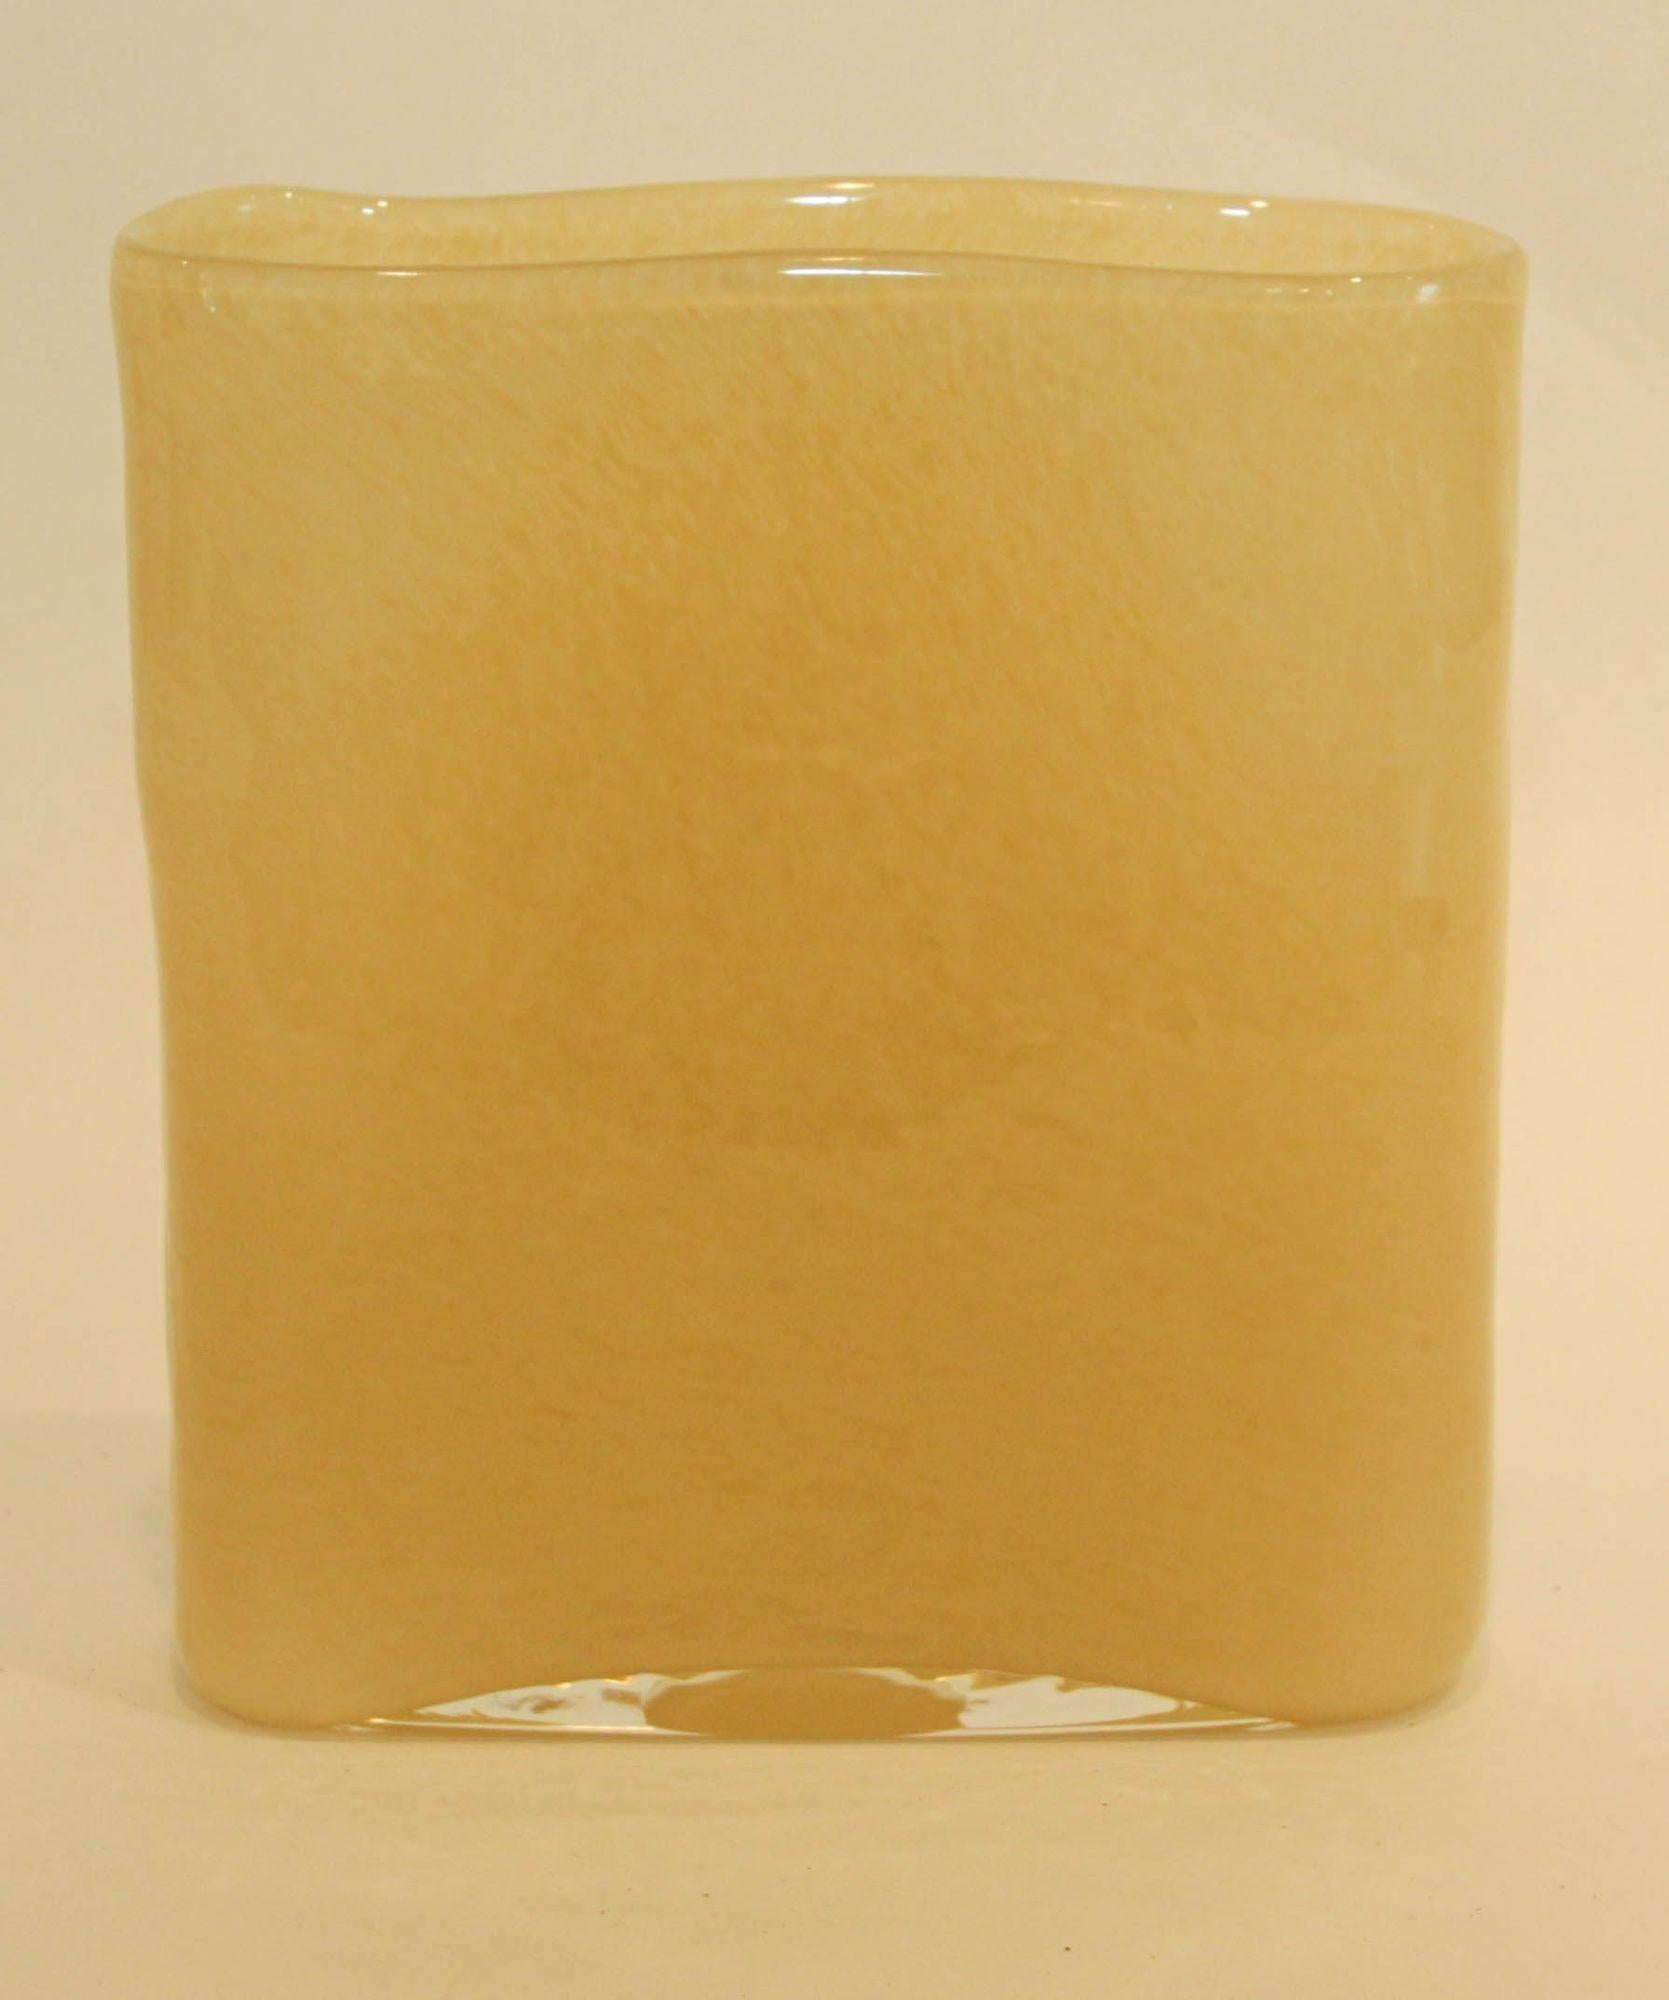 20th Century Handcrafted Yellow Beige Art Glass Vase Kosta Boda Style, 1980s For Sale